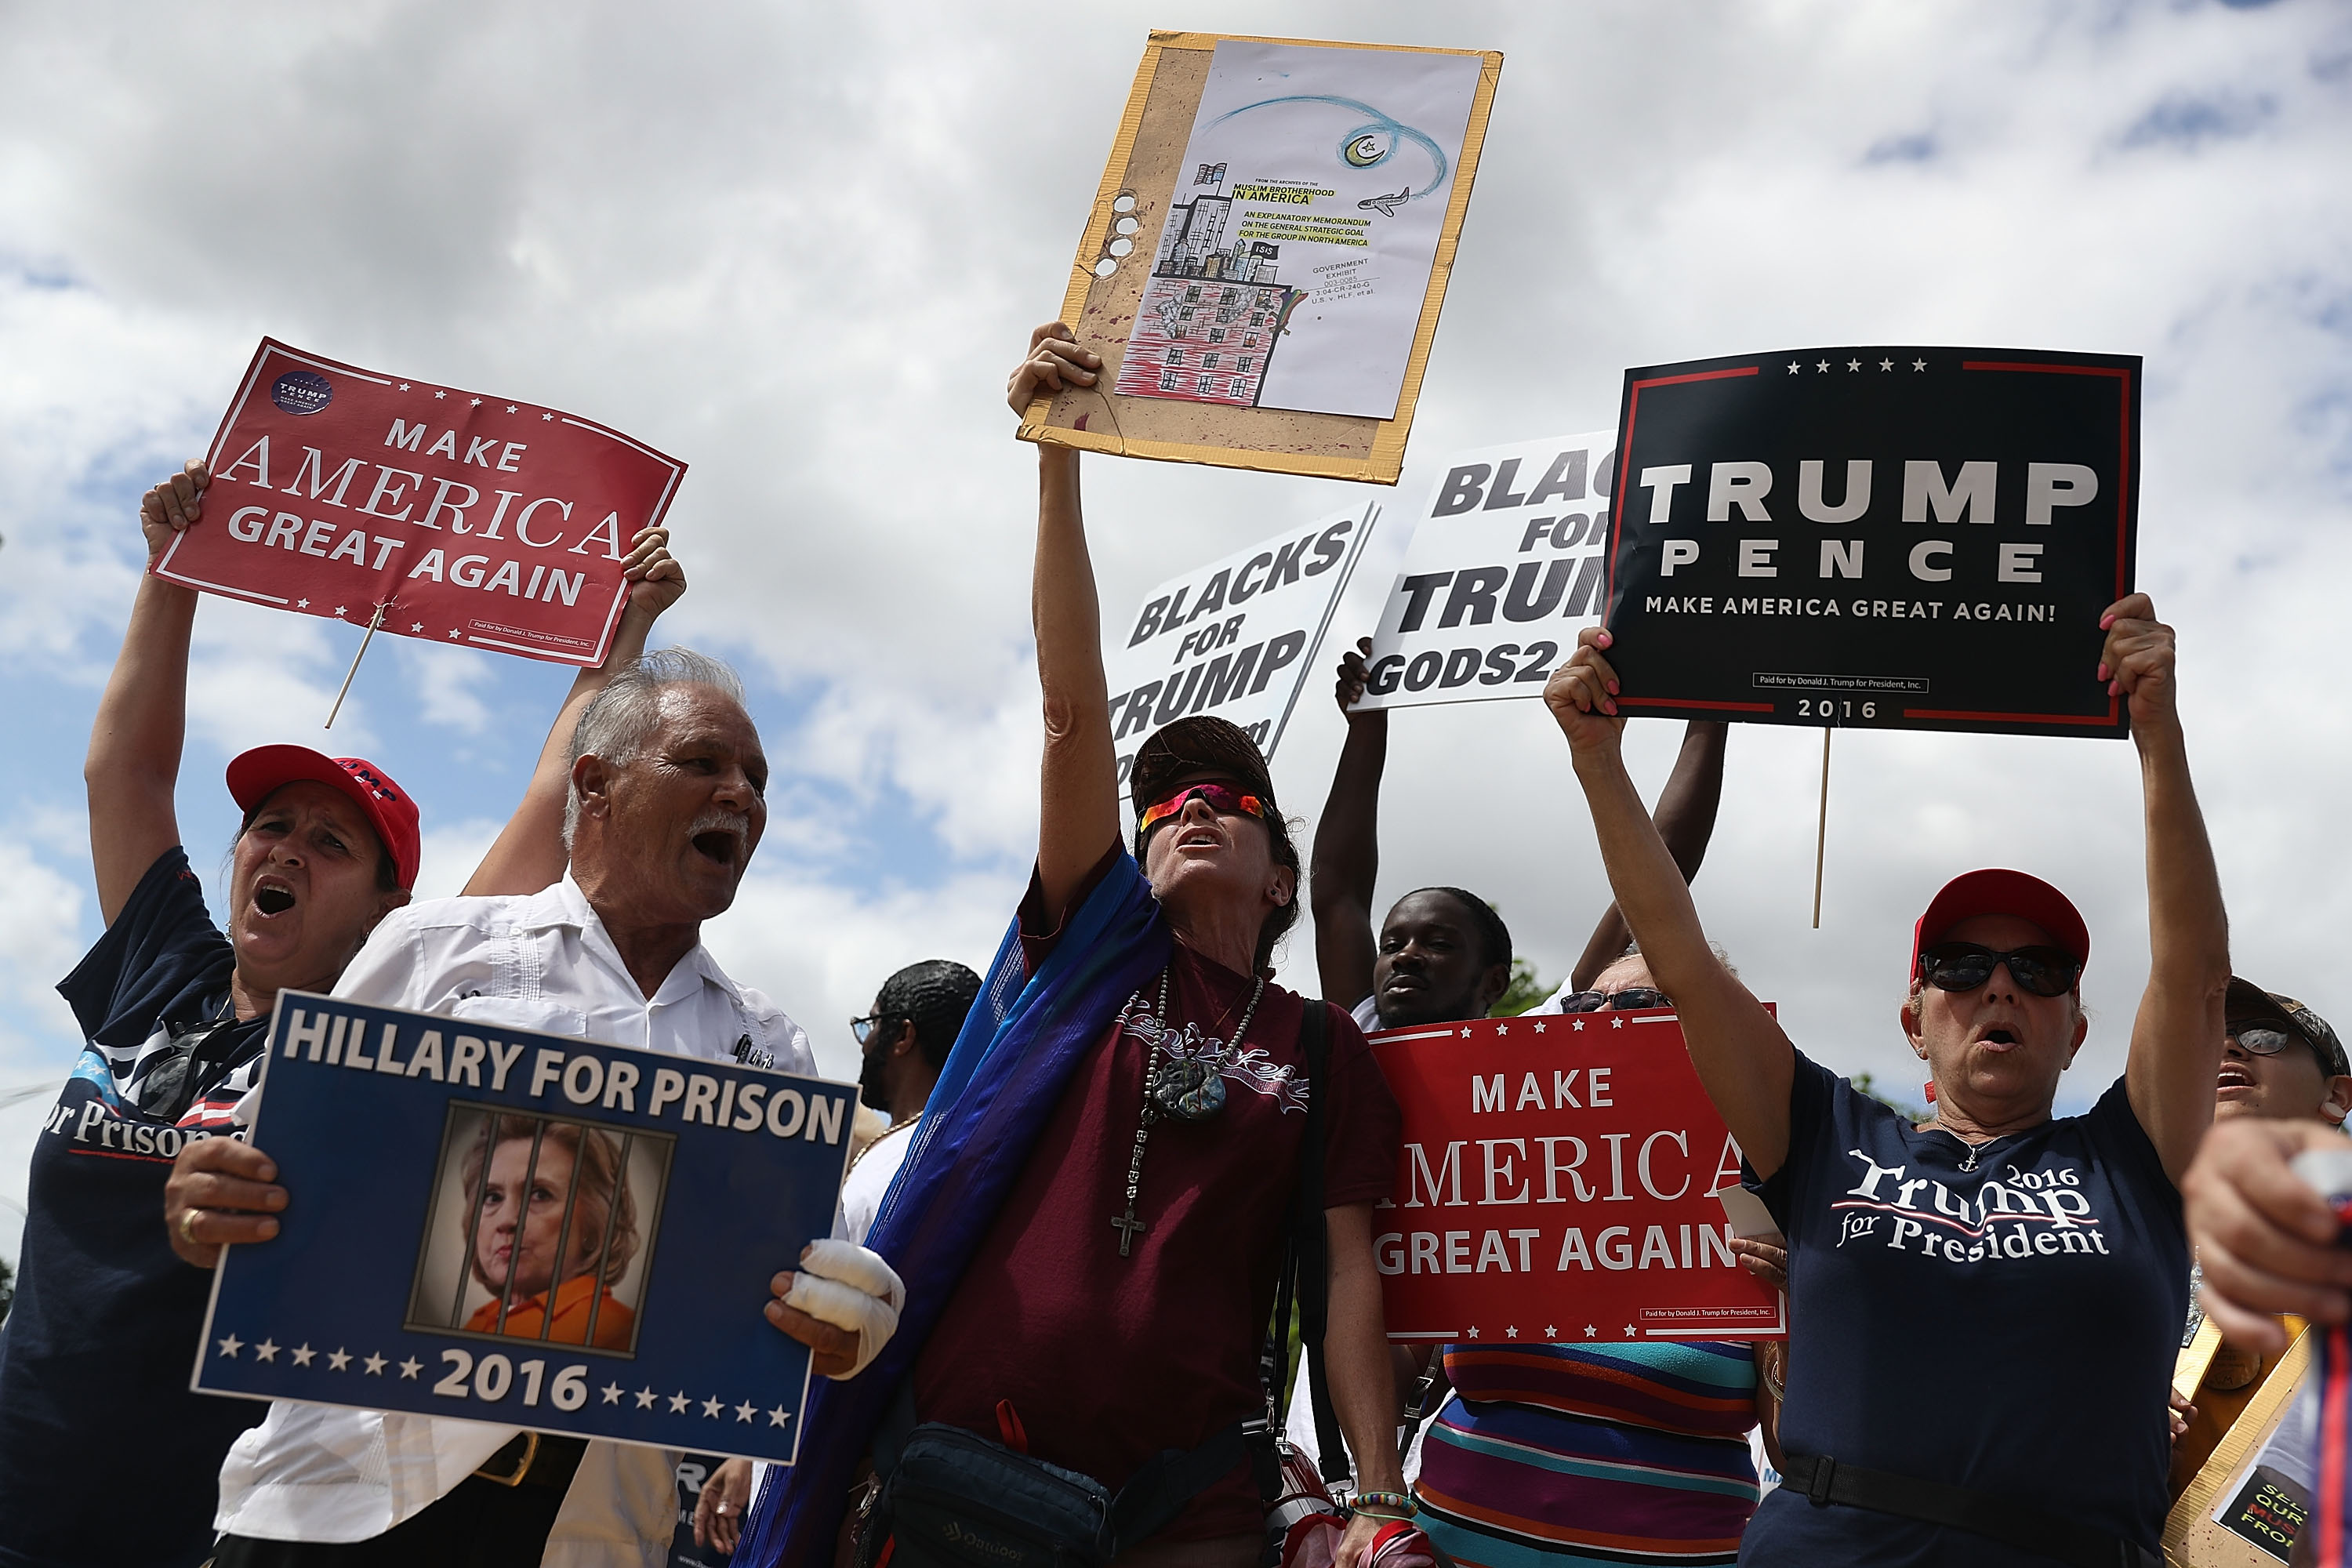 Supporters of Republican presidential nominee Donald Trump show their support for him before the start of the campaign event for Democratic presidential nominee Hillary Clinton at the Miami Dade College - Kendall Campus, Theodore Gibson Center on October 11, 2016 in Miami, Florida. (Joe Raedle—Getty Images)